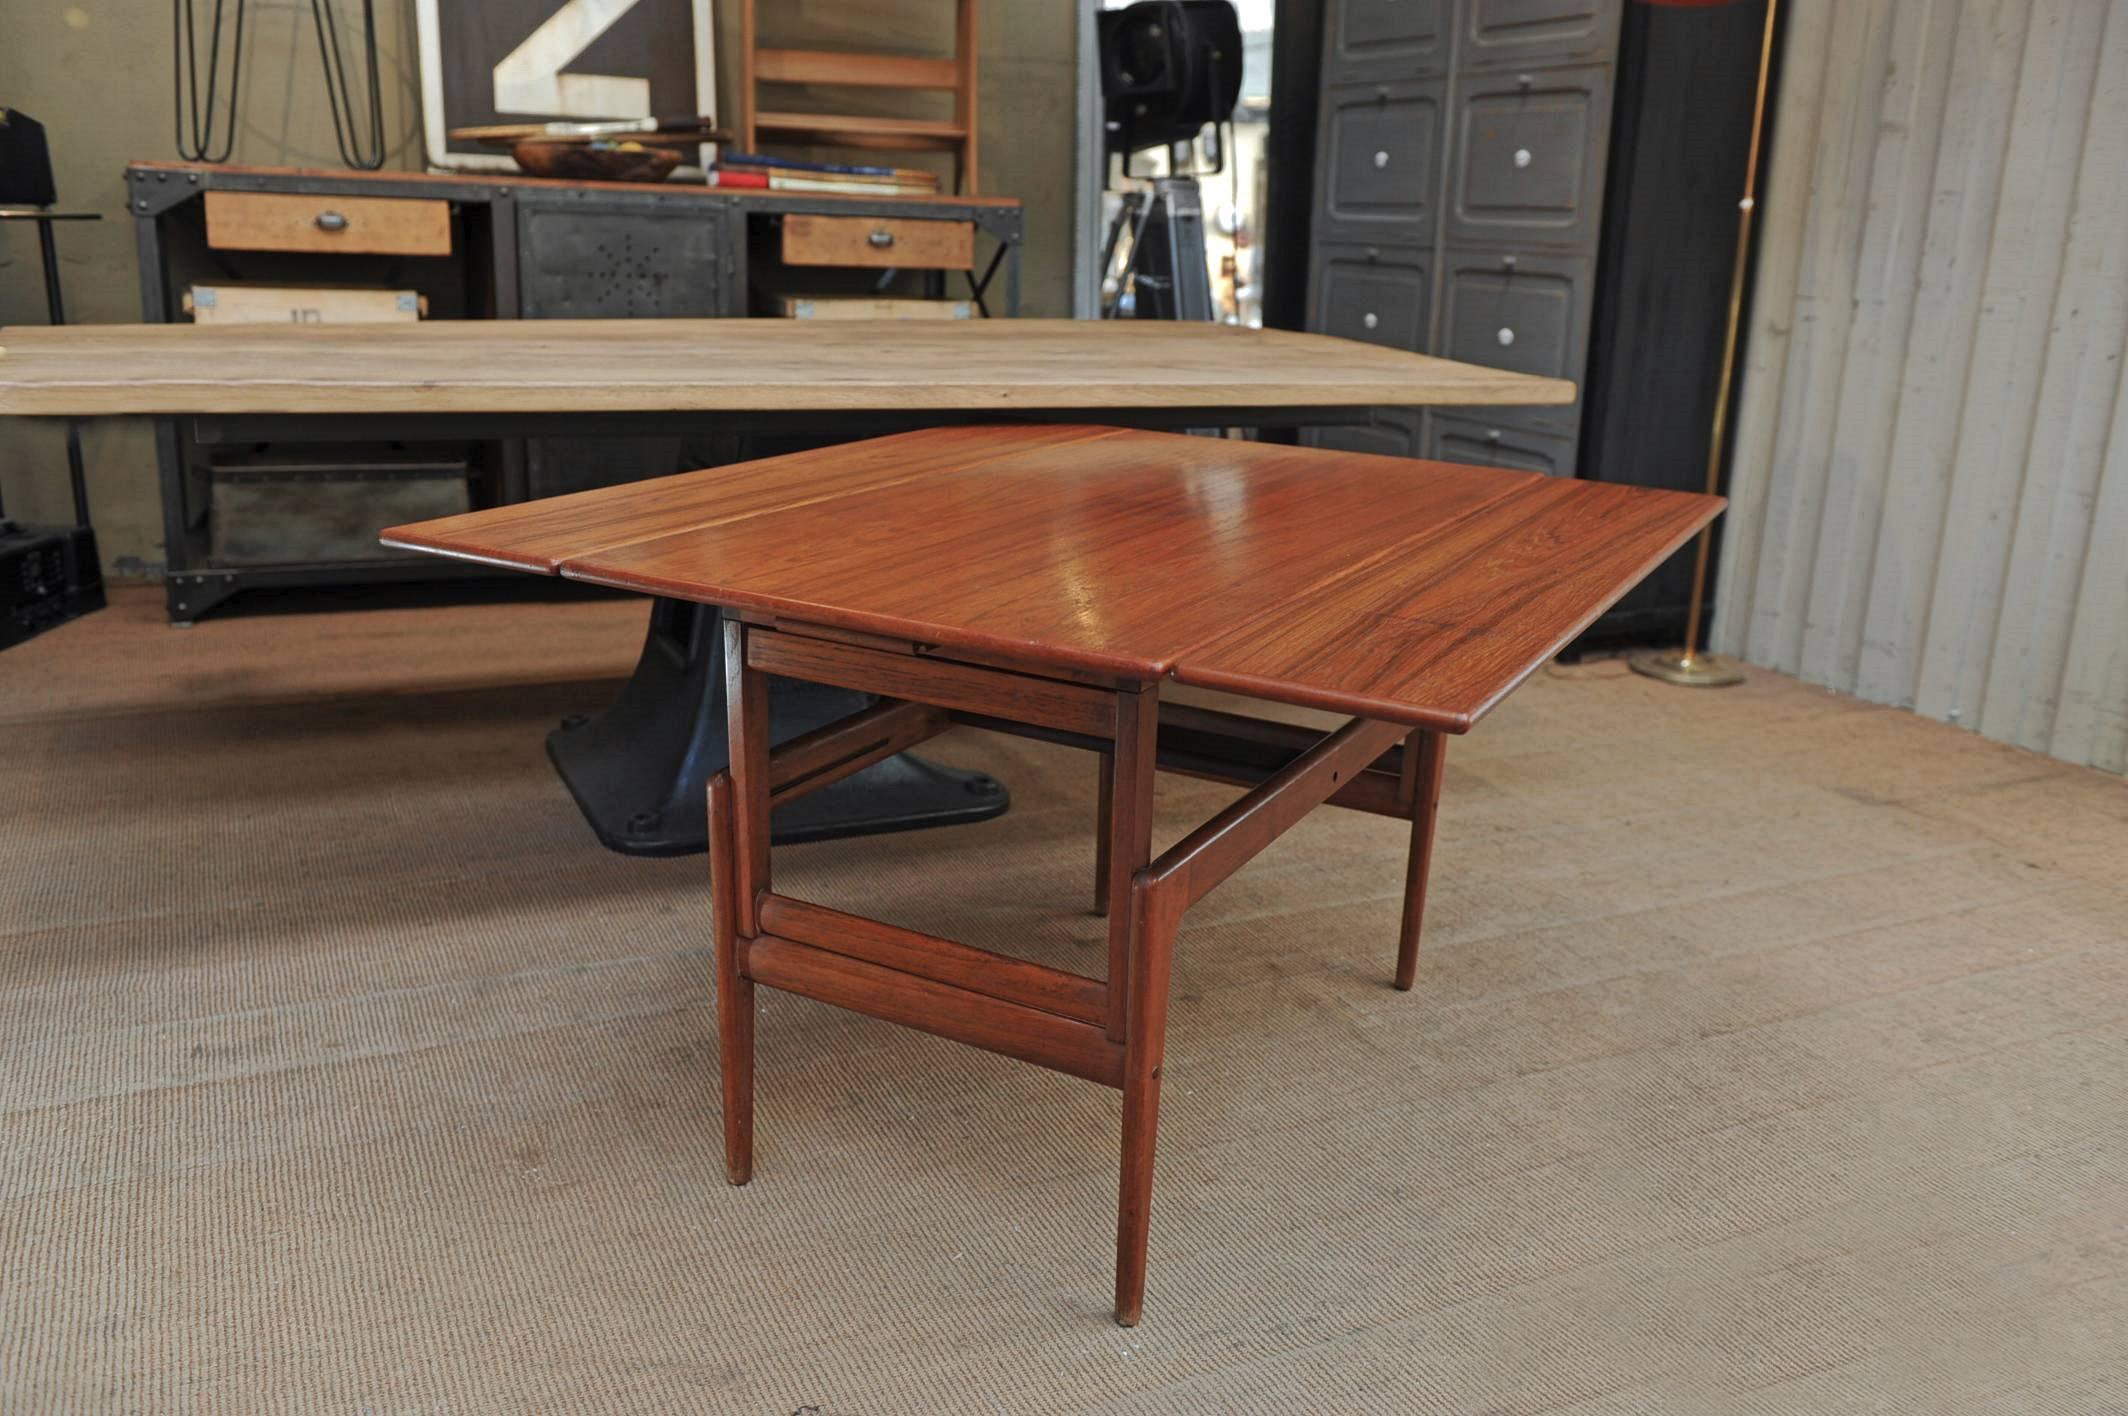 Scandinavian System Dining and Coffee Table with Inside Extensions by Samcom In Good Condition For Sale In Roubaix, FR